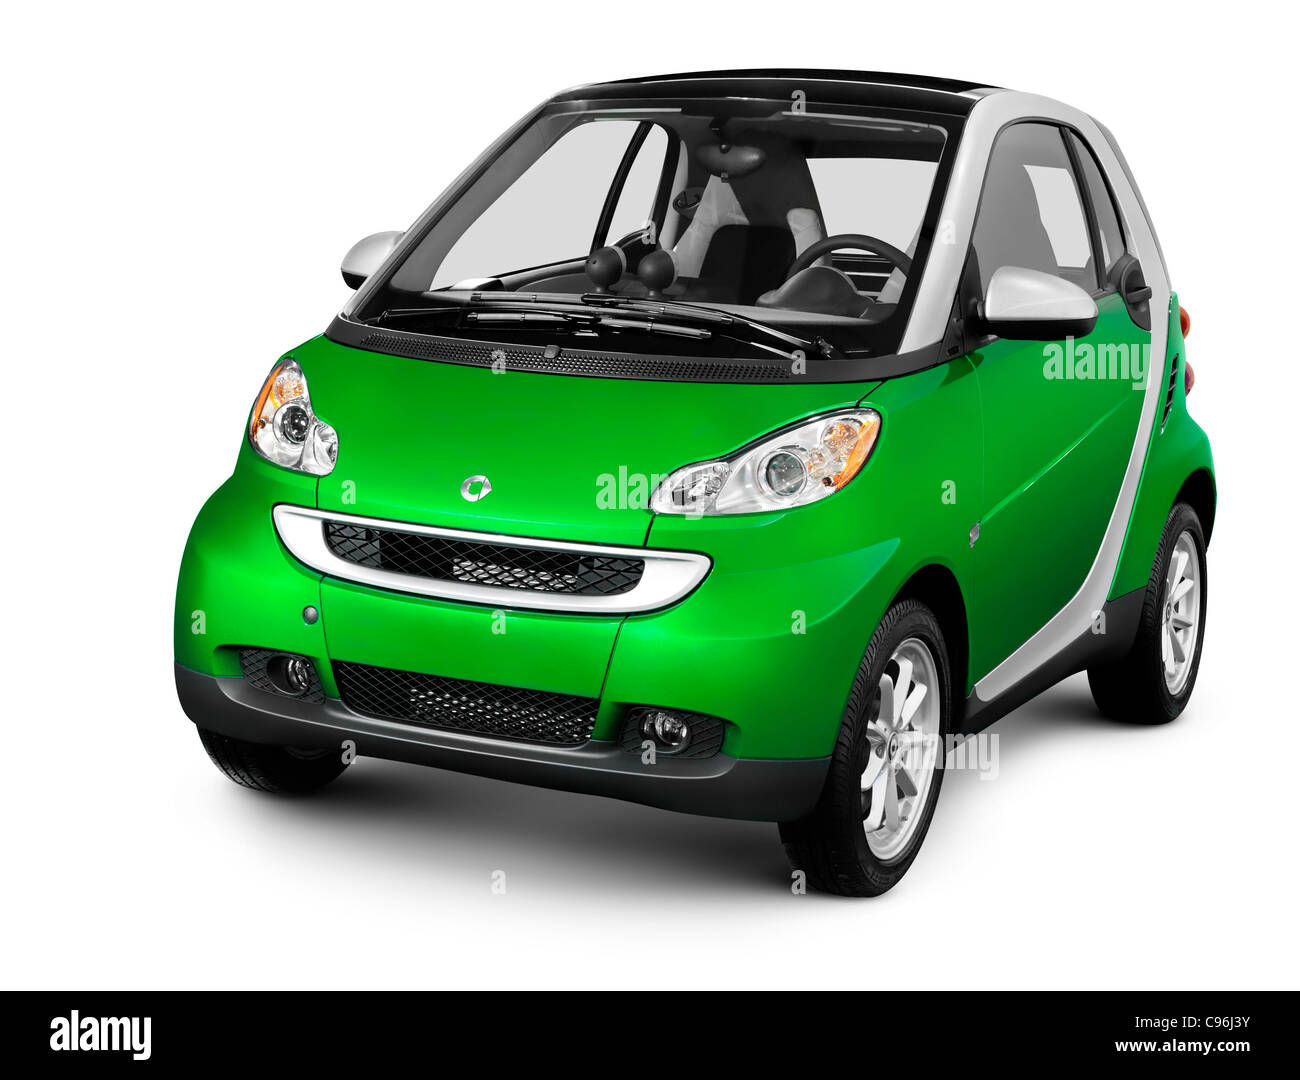 Green fuel efficient mini car Smart Fortwo. Isolated silhouette with a clipping path on white background. Stock Photo